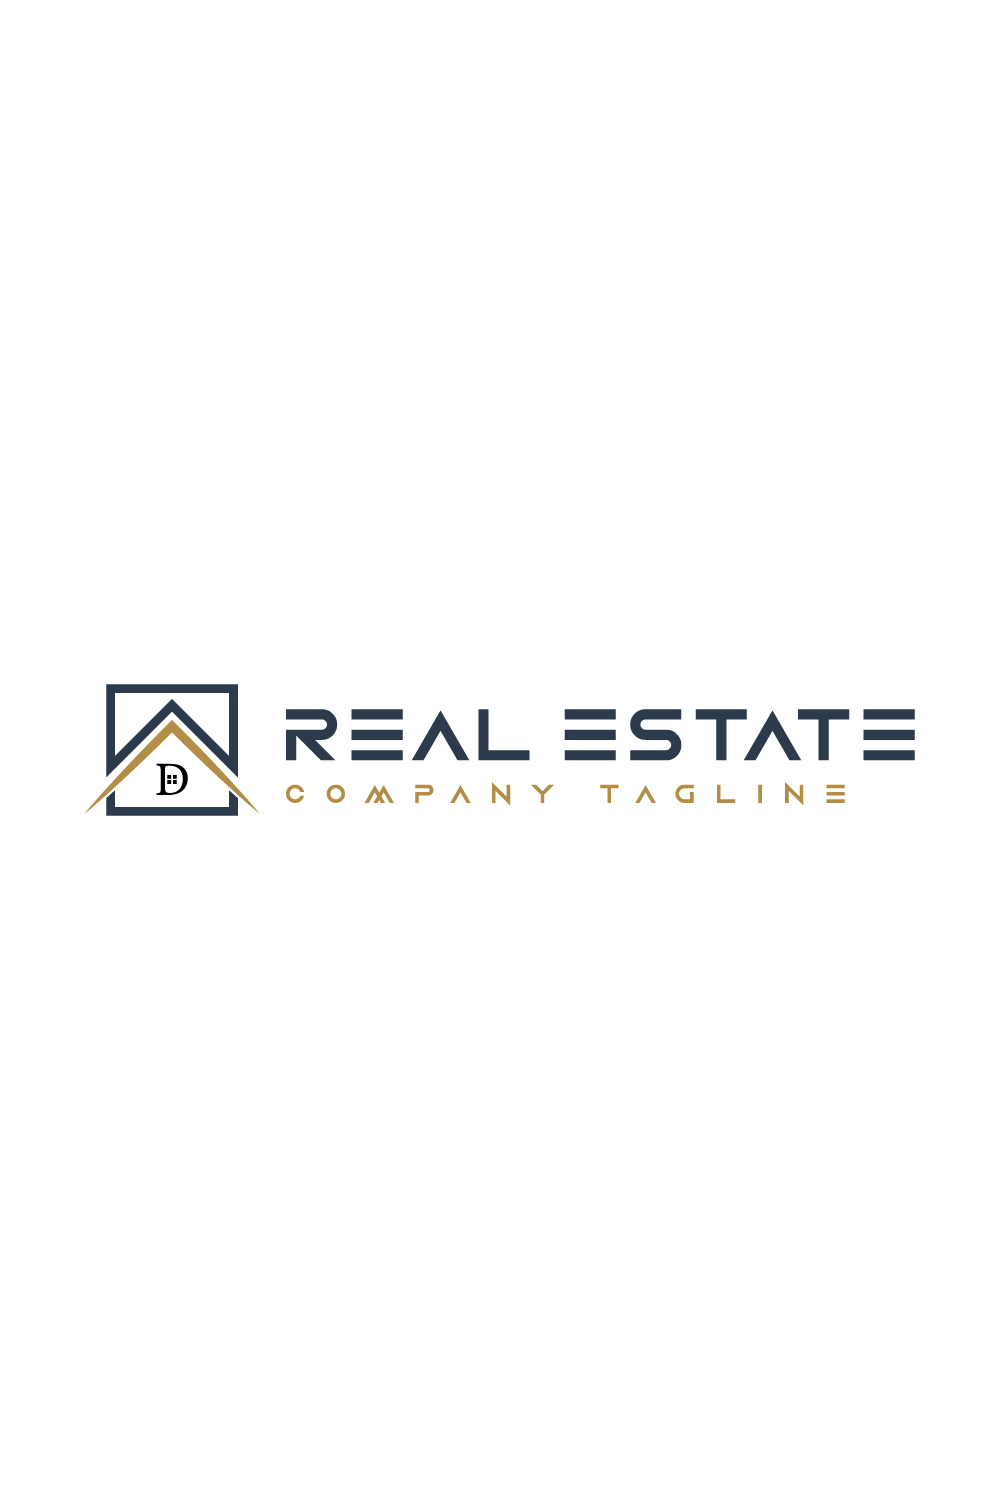 Real estate logo with golden, dark blue color and C pinterest preview image.